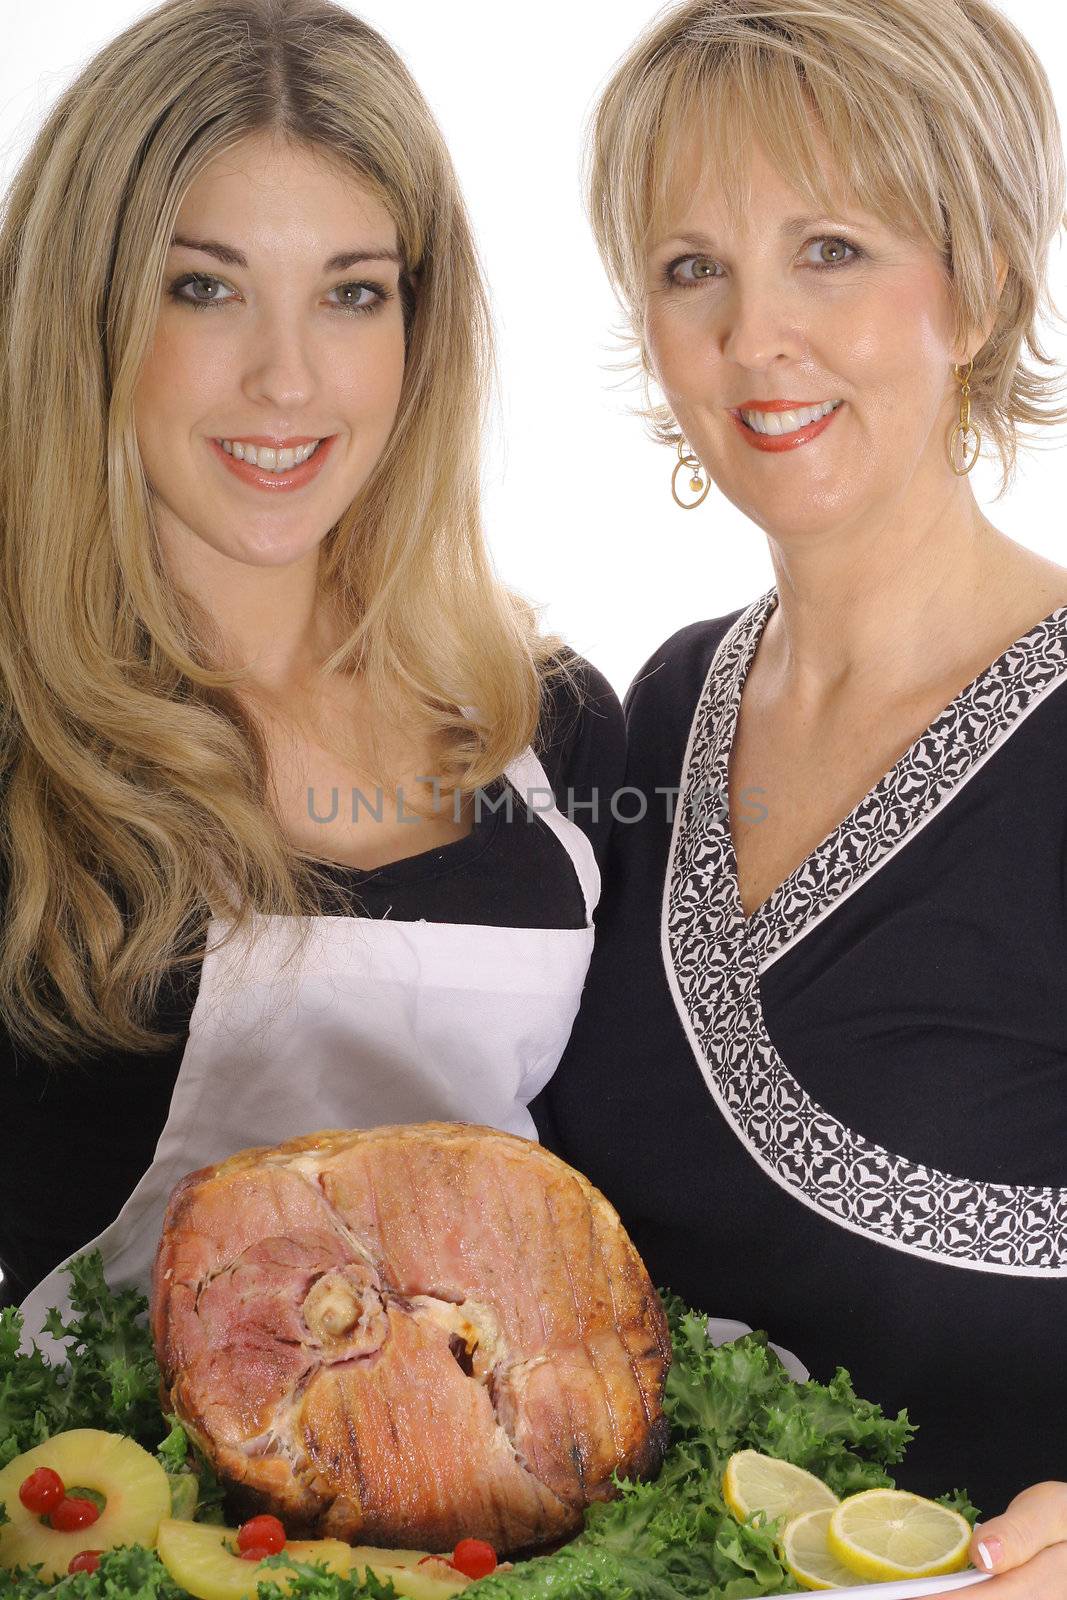 mother and daughter cooking ham together isolated on white by creativestock